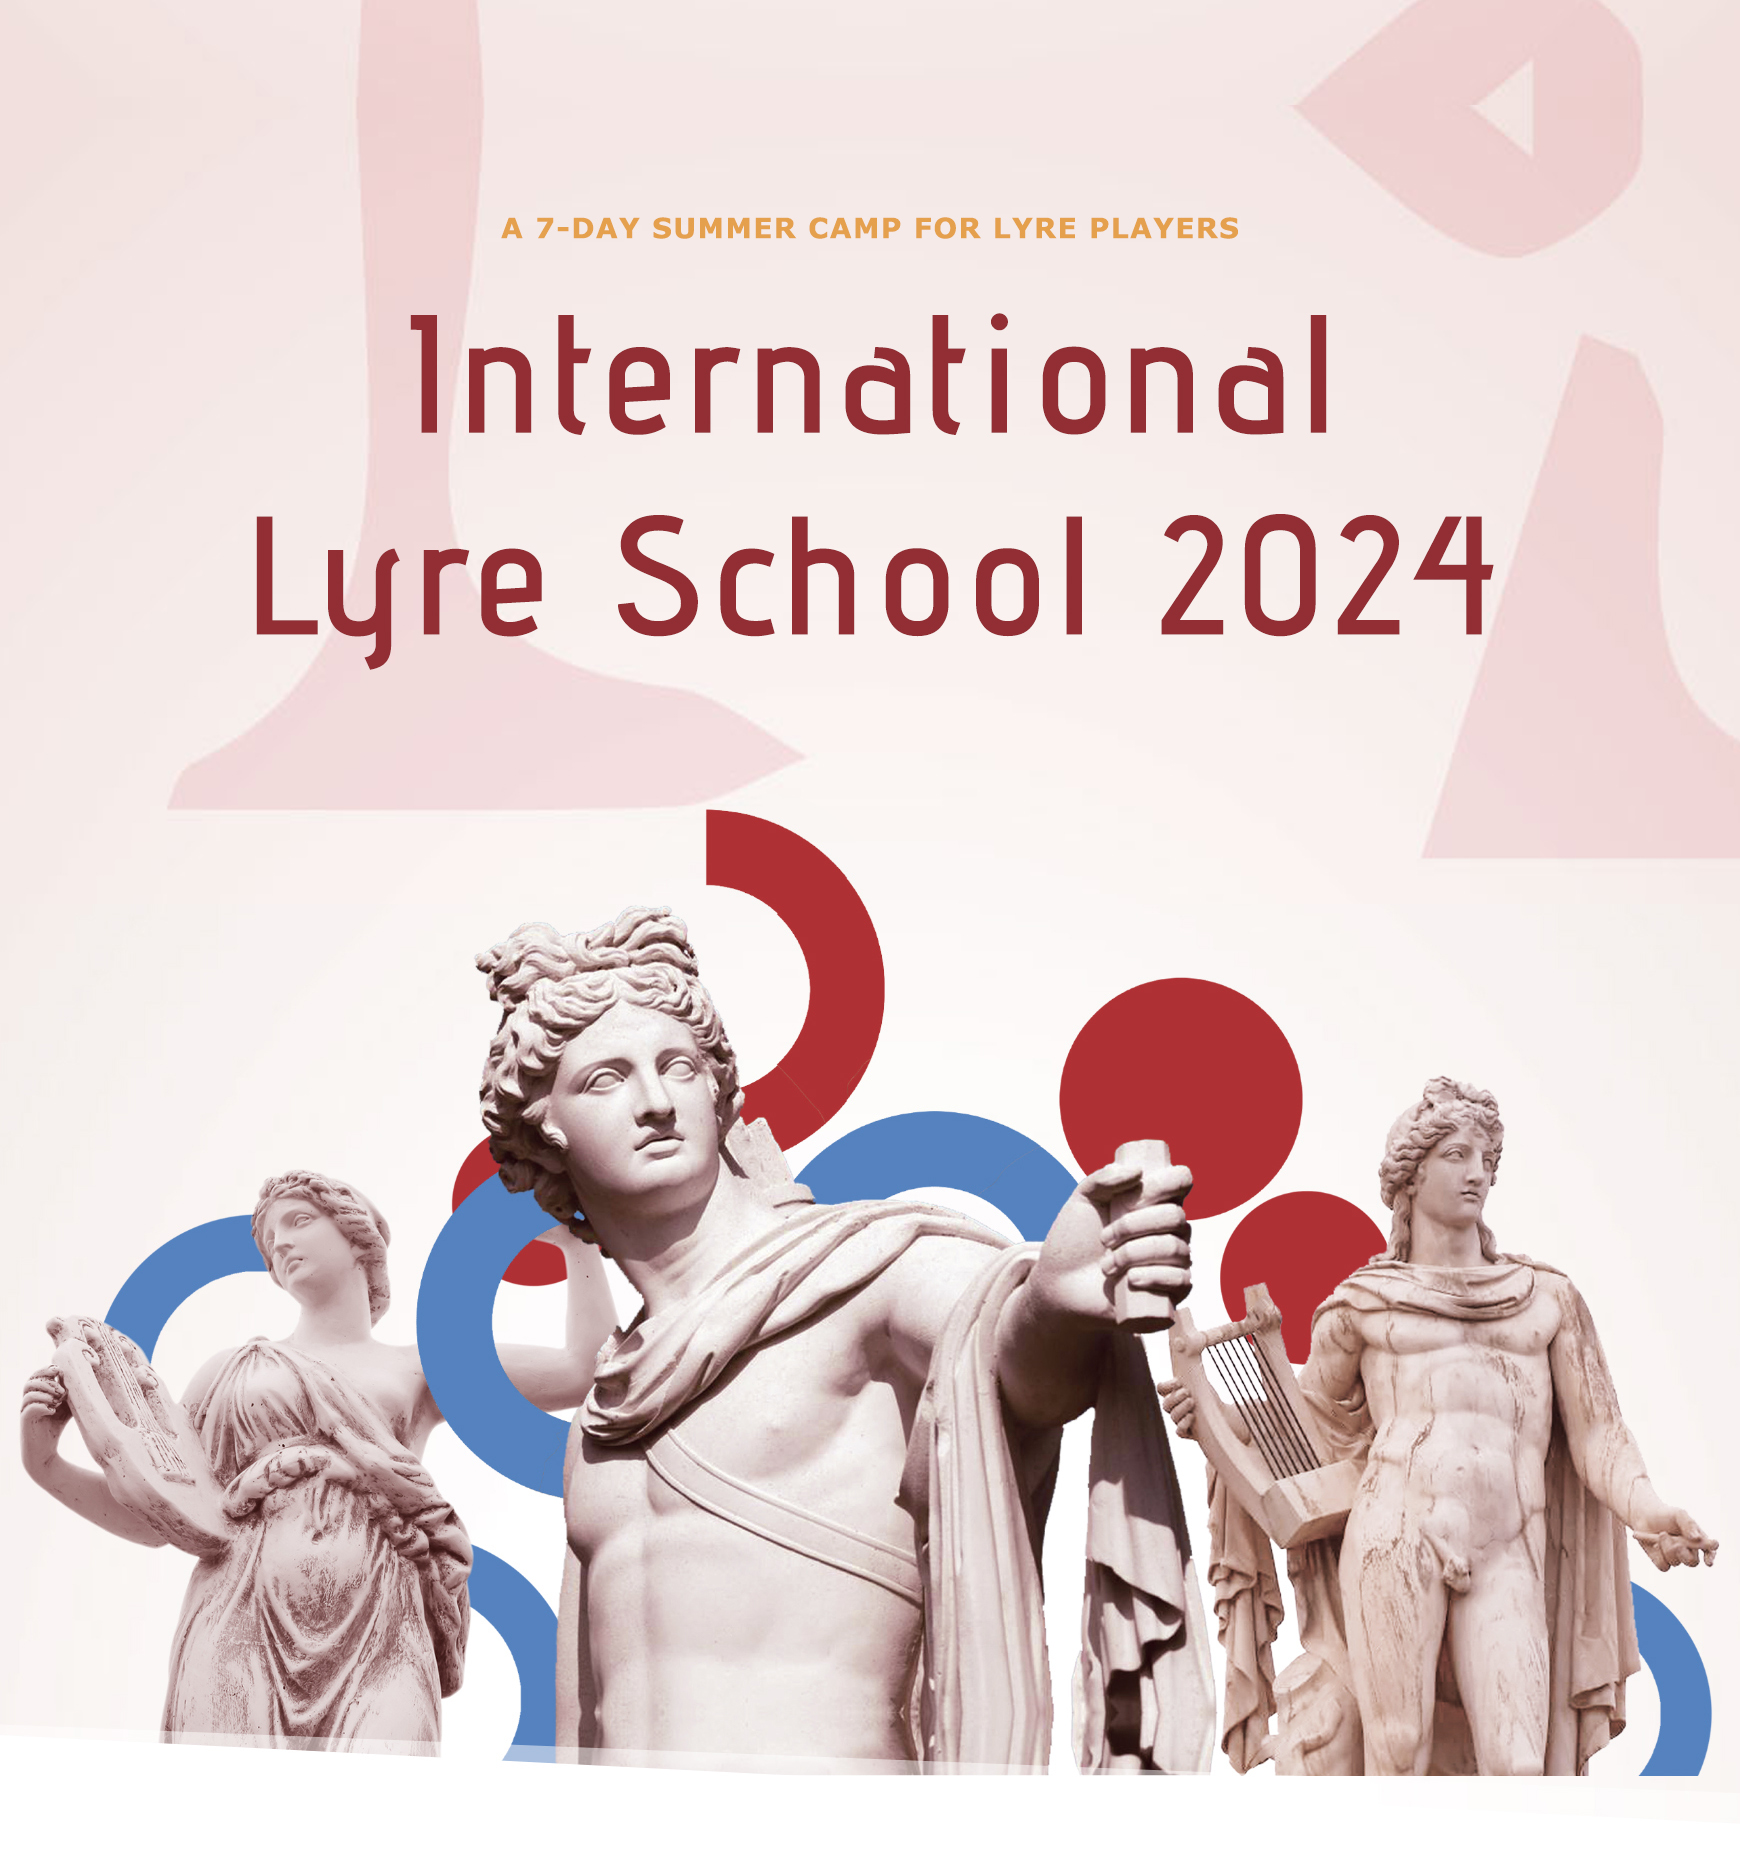 International Lyre Summer School by LyreAcademy.com - Live & Study Together for 7 days - Lessons for Your Level - Access to All Courses - Certificate of Attendance - Hands-on Experience - Communal living - Mediterranean Diet with an Ancient Twist